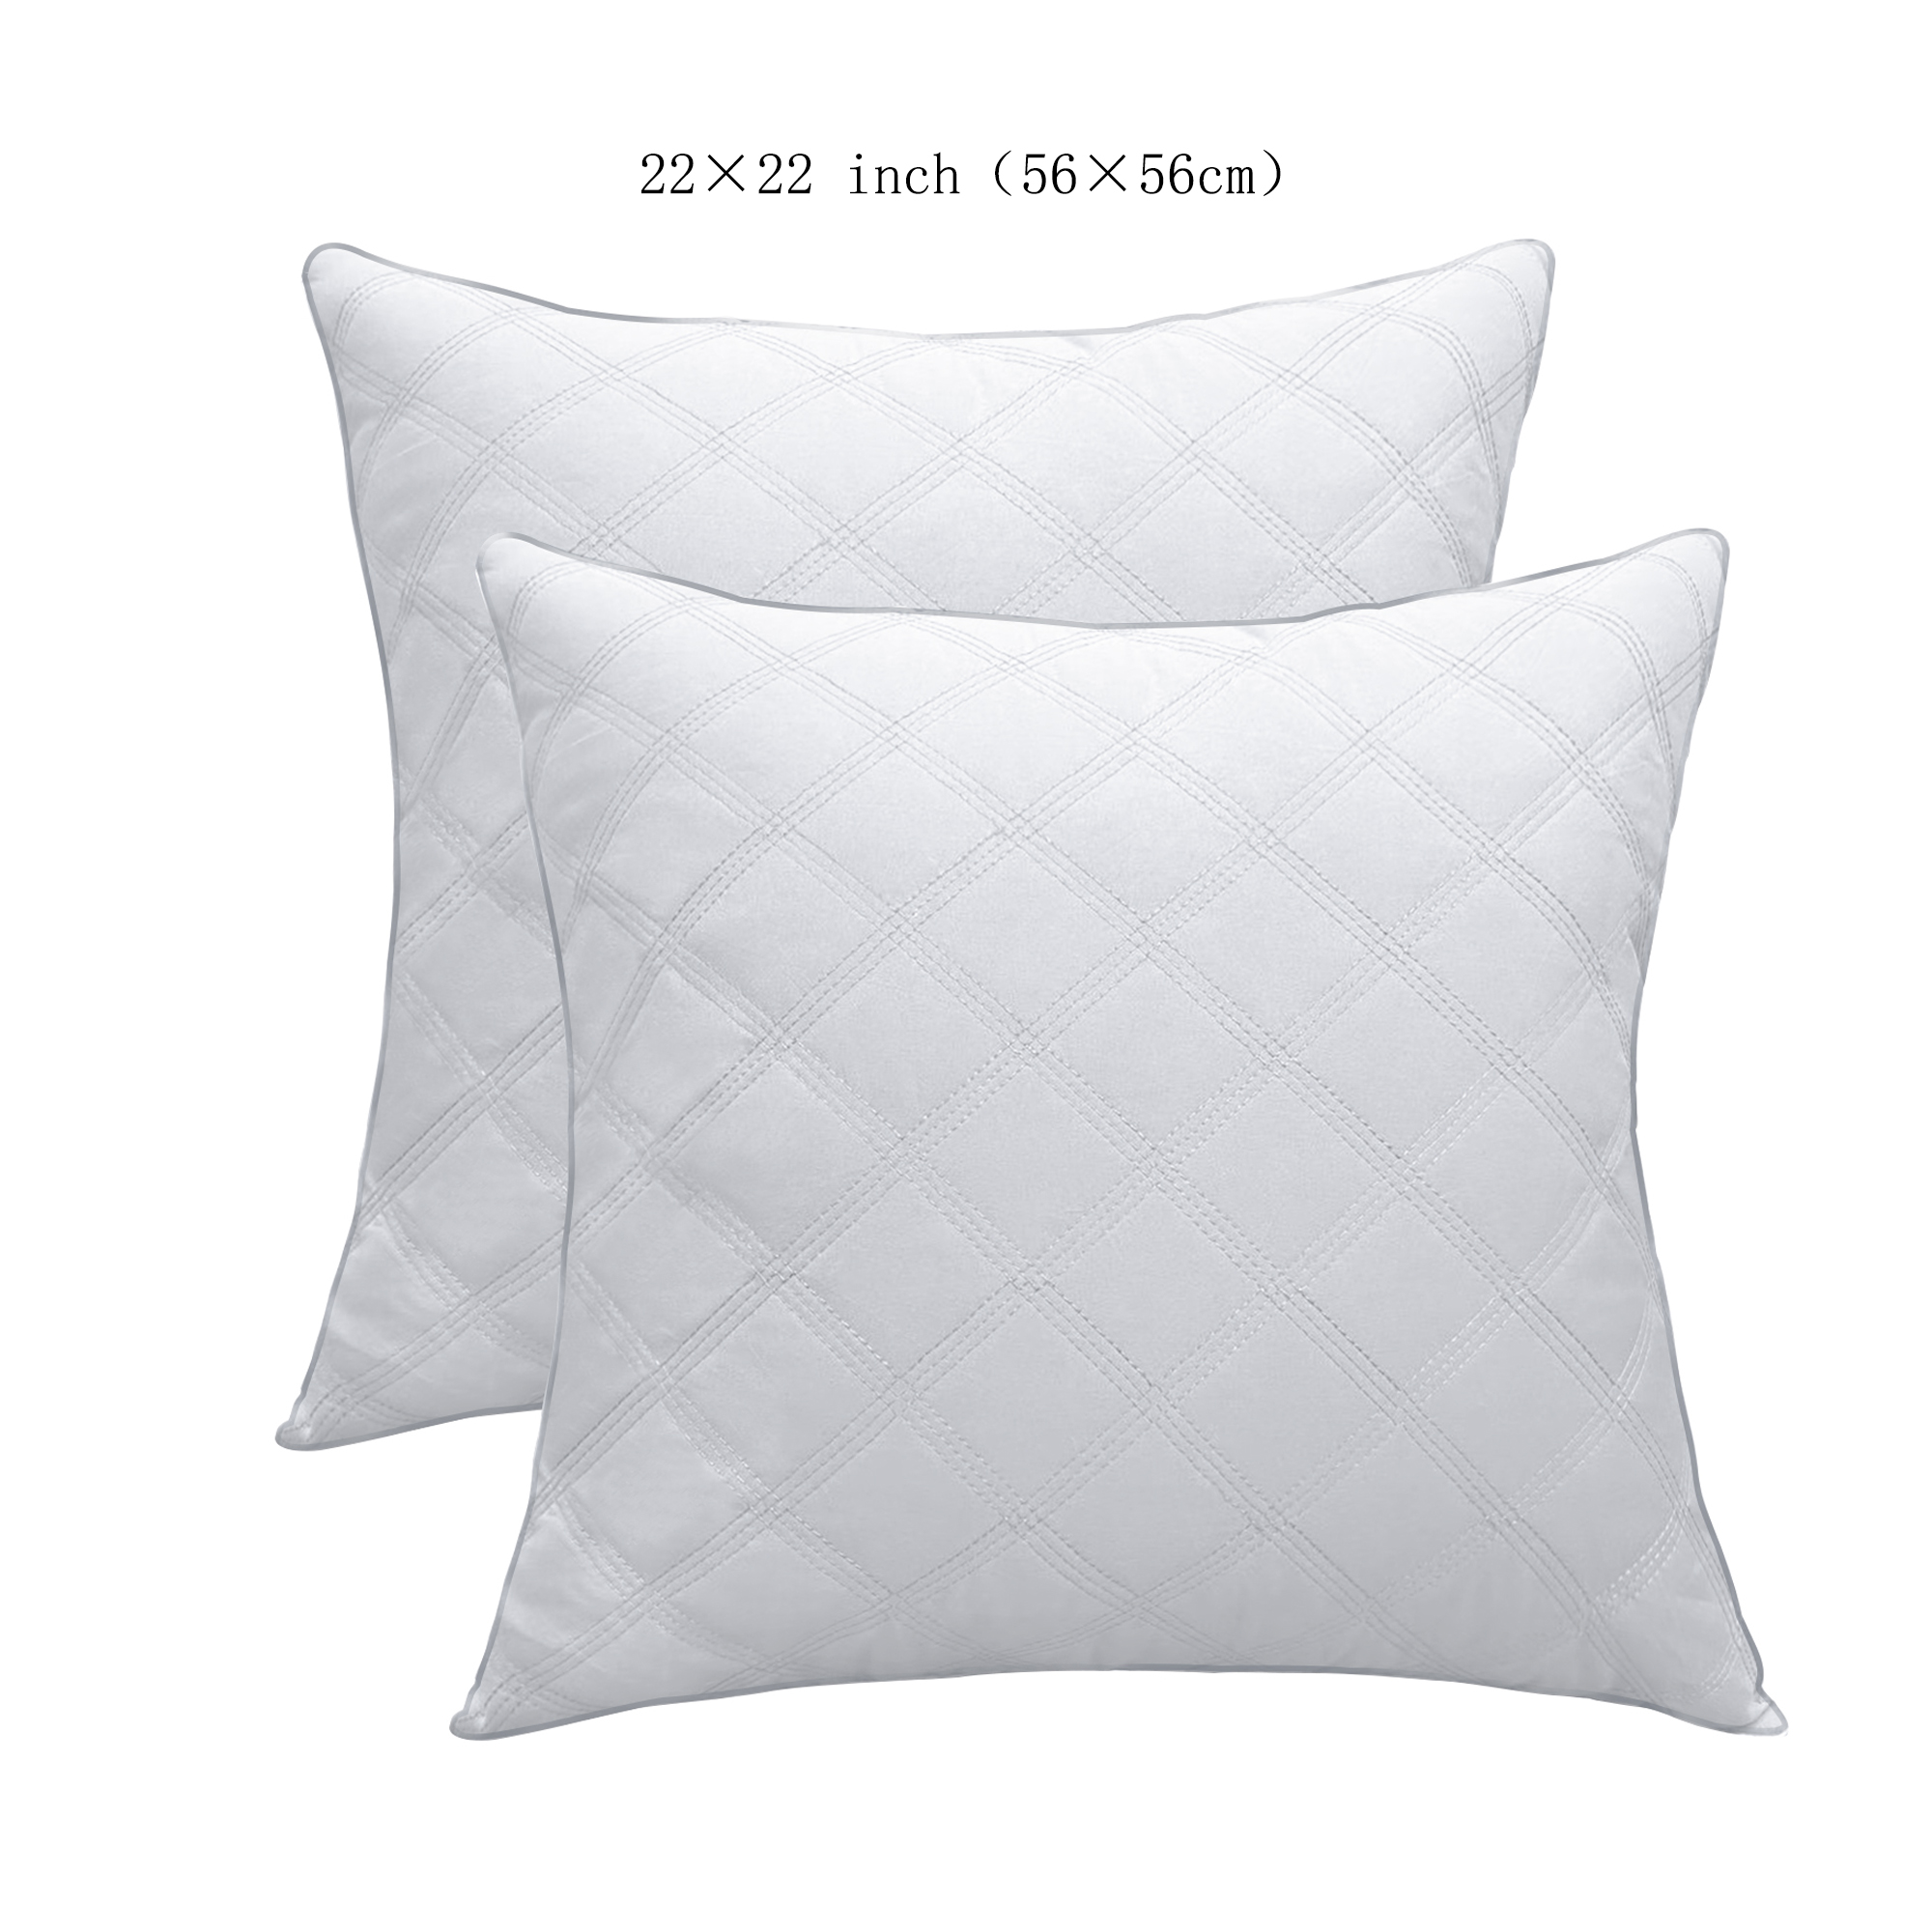 2pcs/set Throw Pillow Inserts Quilted, Throw Pillows Hypoallergenic -  Bedding Square Pillows Luxury Decorative for Couch Bed Office Hotel